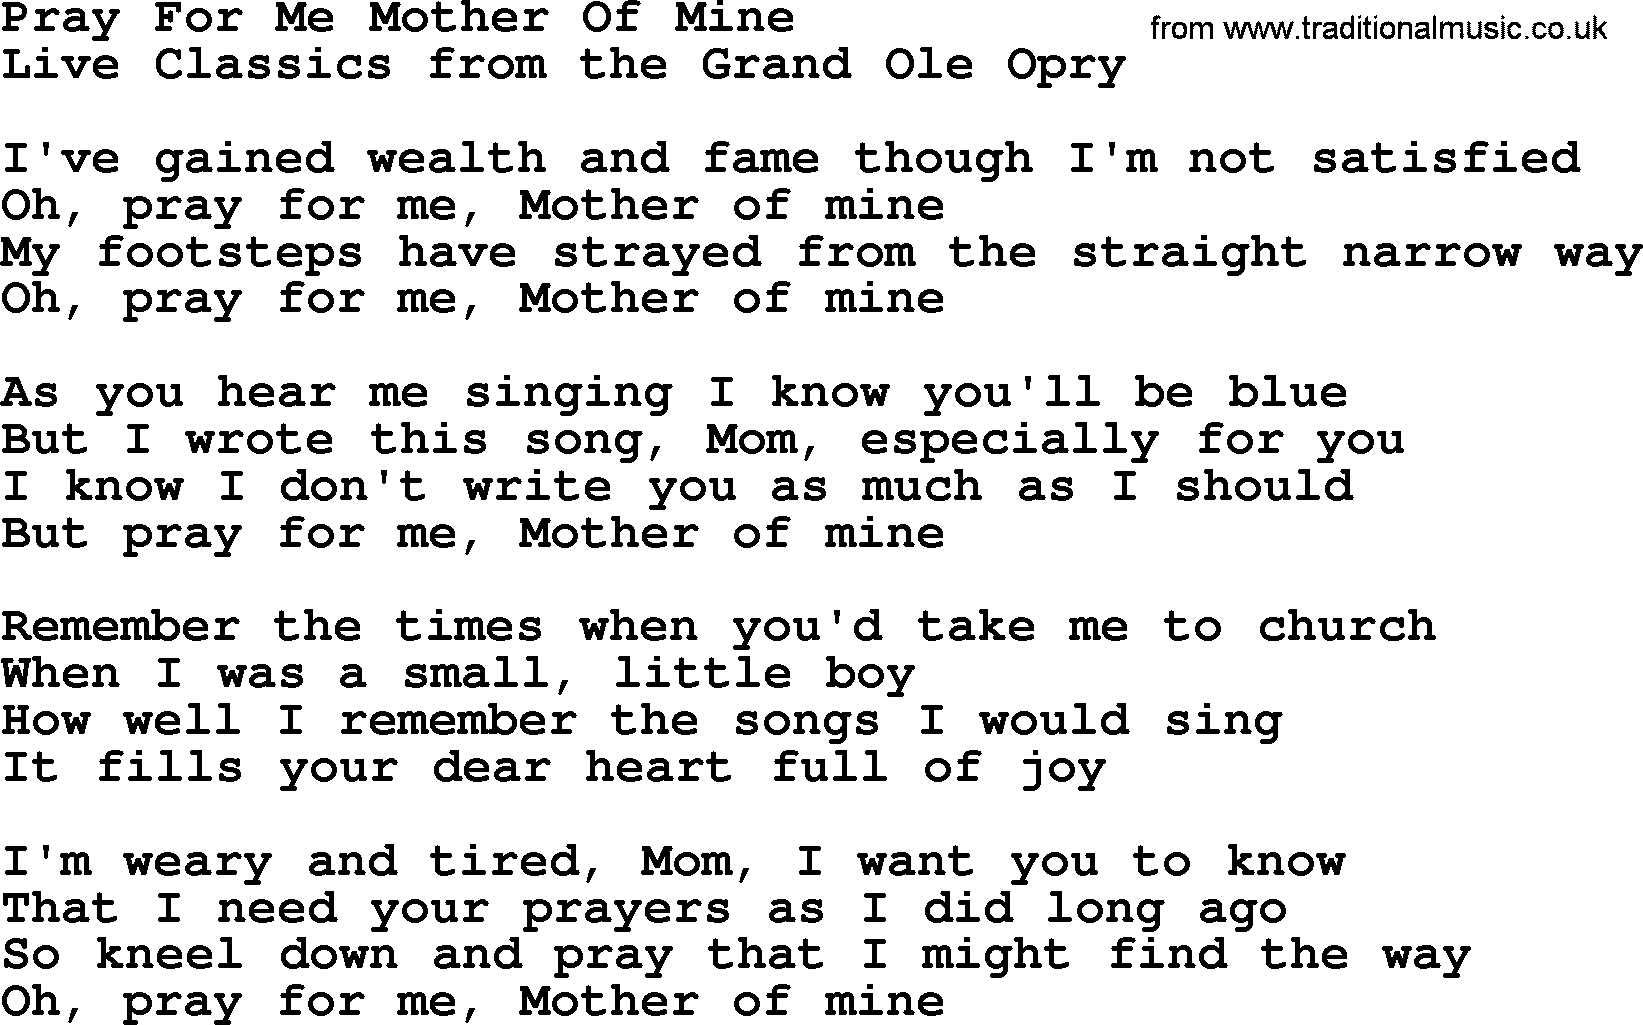 Marty Robbins song: Pray For Me Mother Of Mine, lyrics